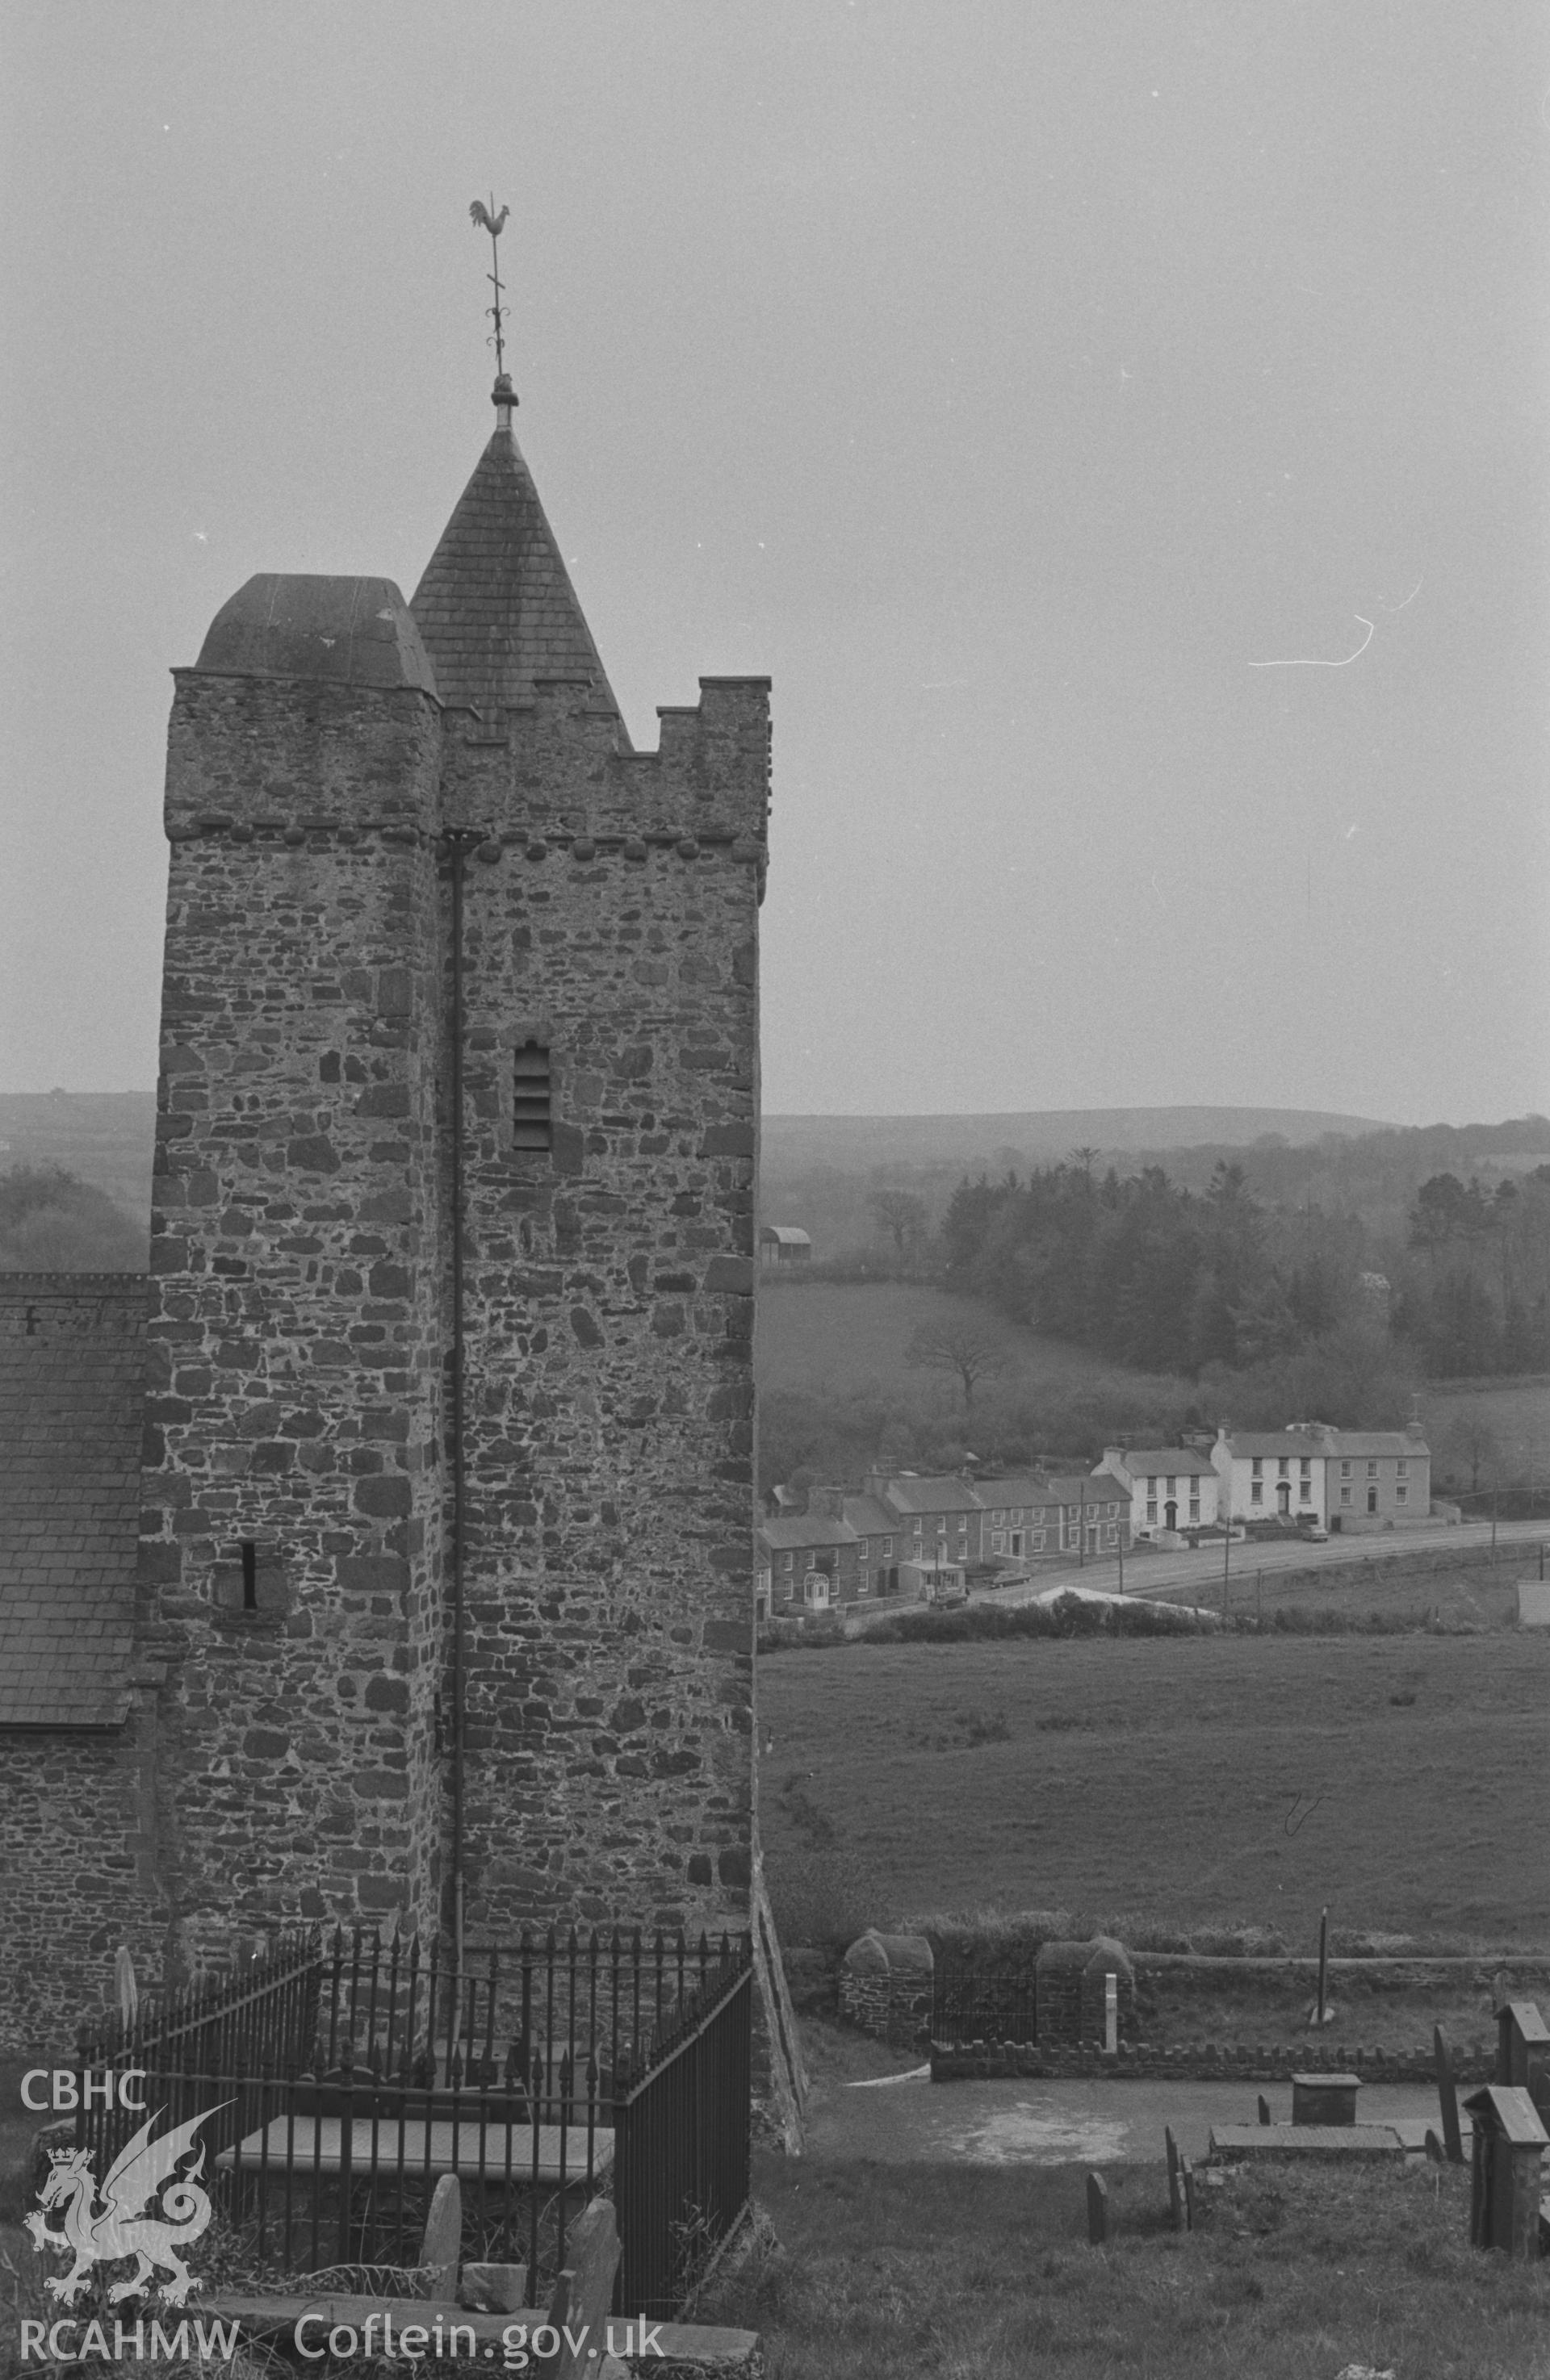 Digital copy of a black and white negative showing church tower at St. David's, with Llanarth main street in distance. Photographed by Arthur O. Chater on 13th April 1967, looking south from Grid Reference SN 423 578.